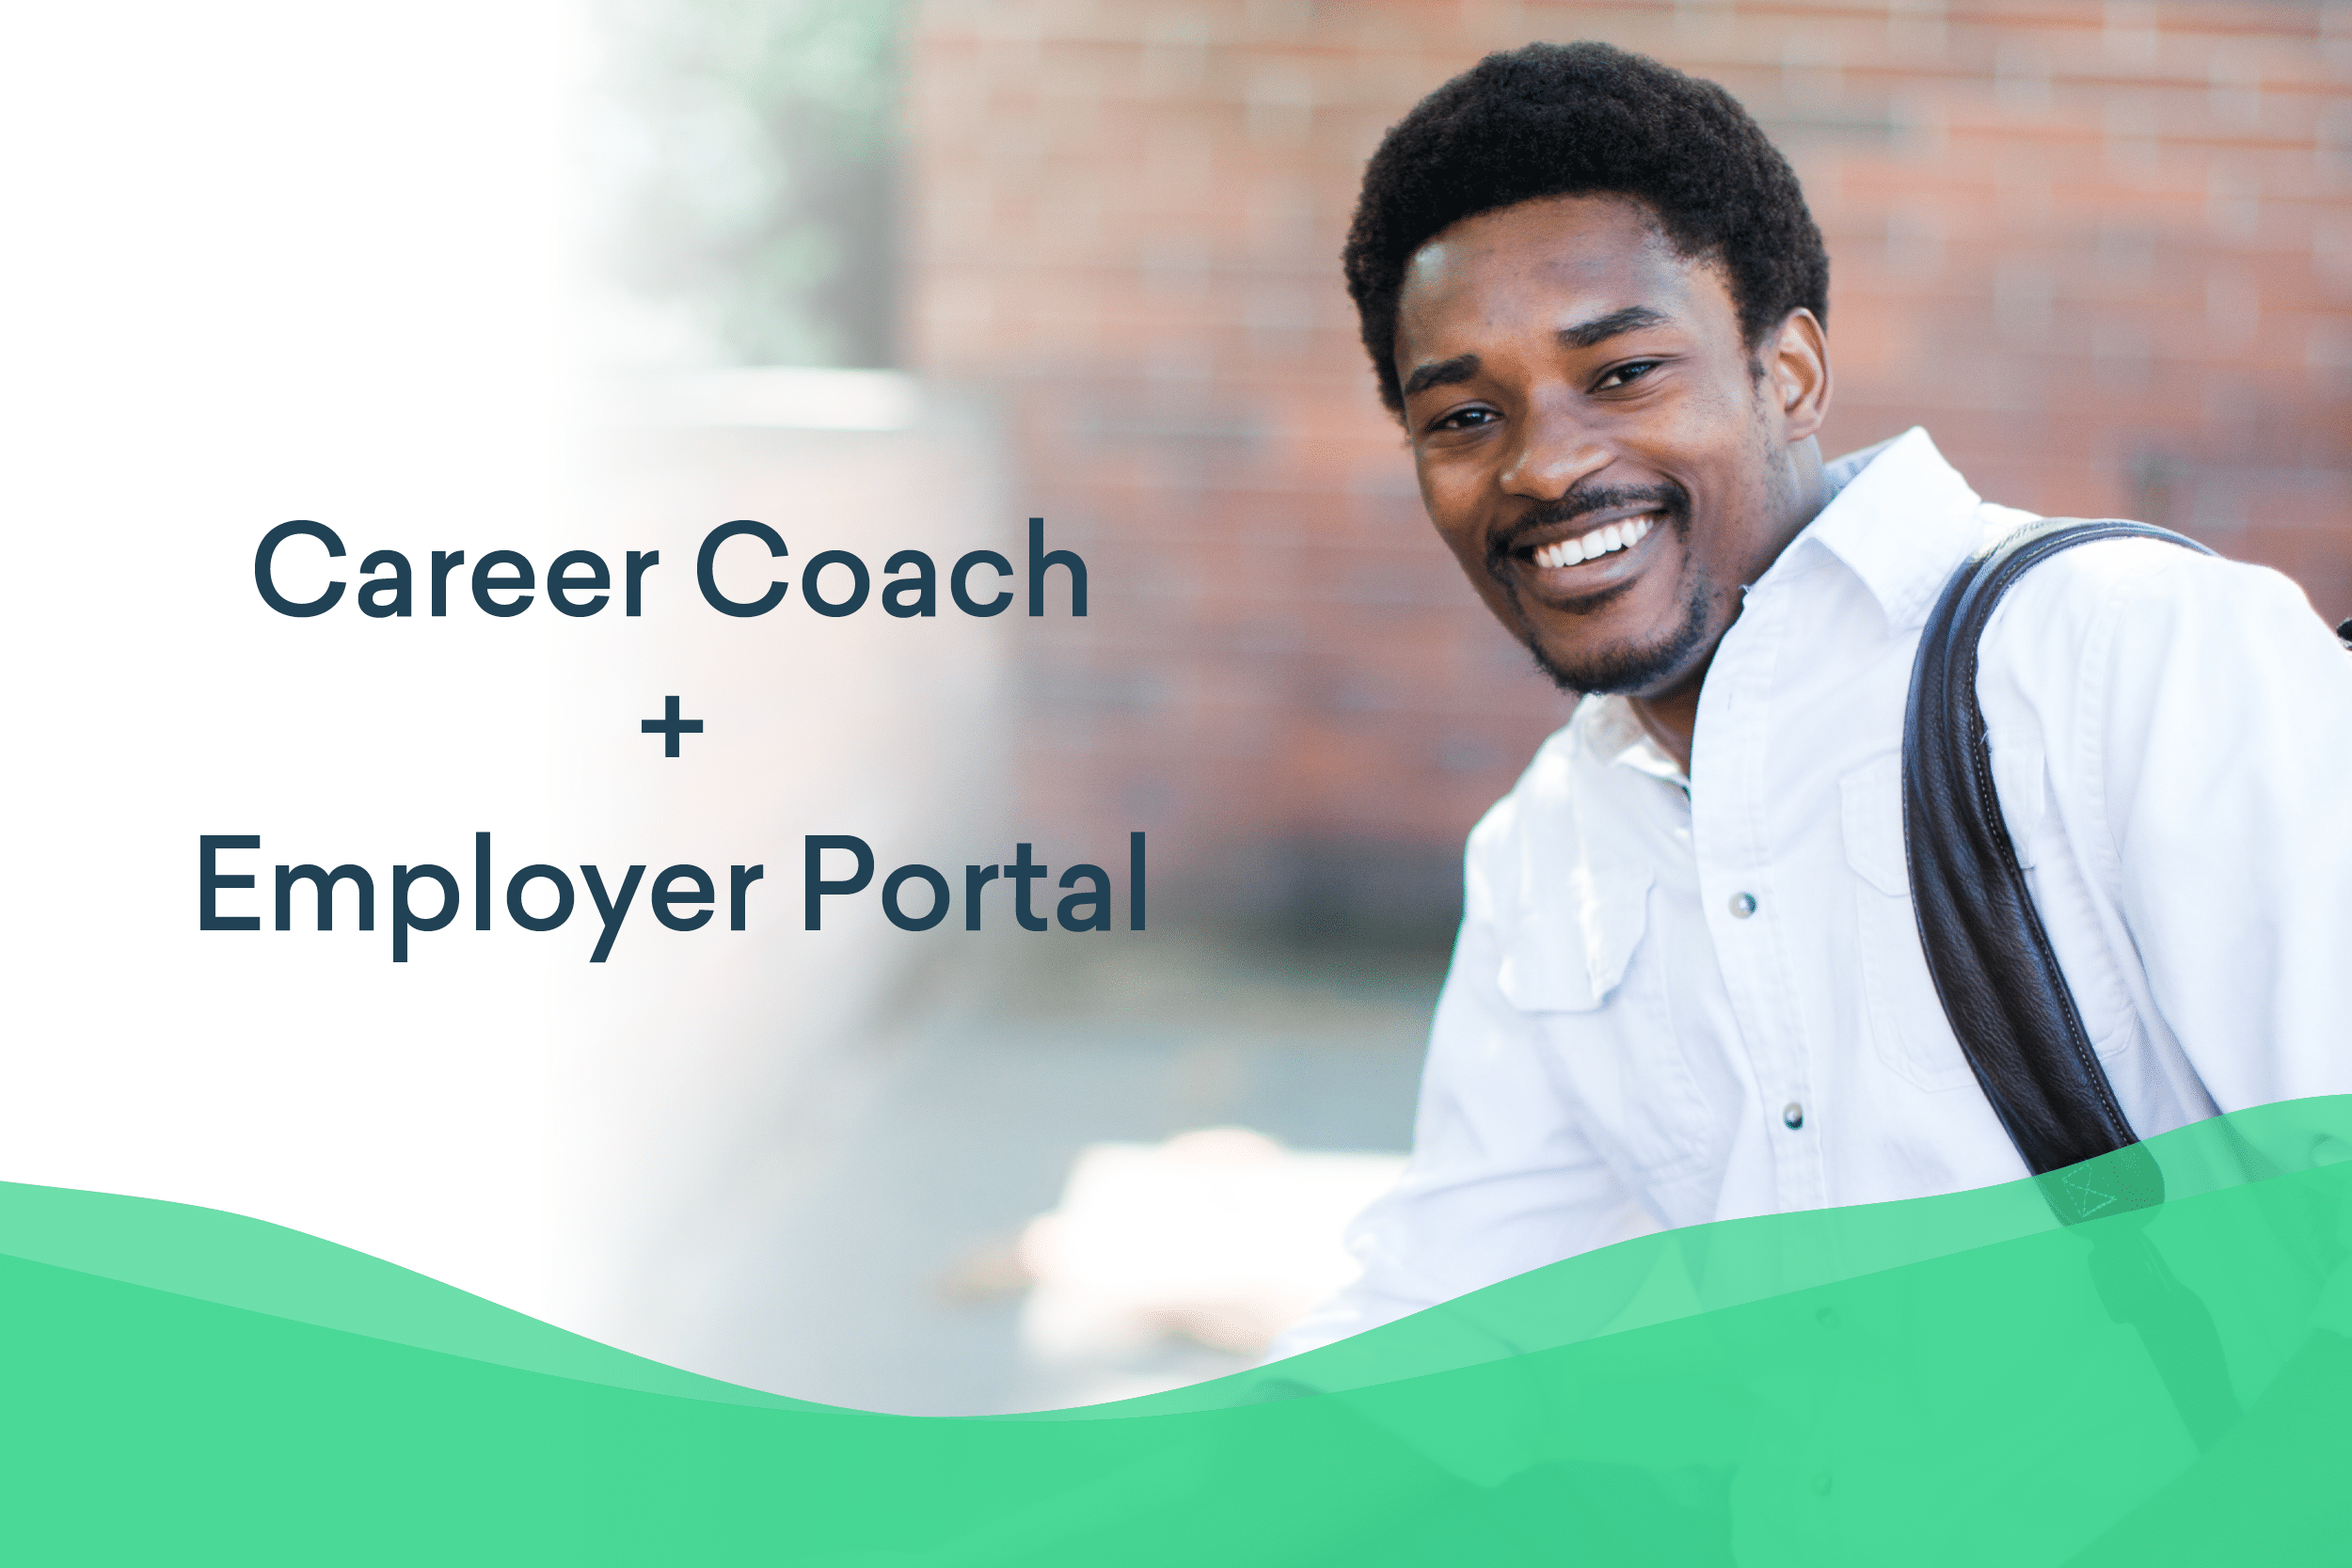 NEW Employer Portal Connects Students to Great Jobs in Career Coach